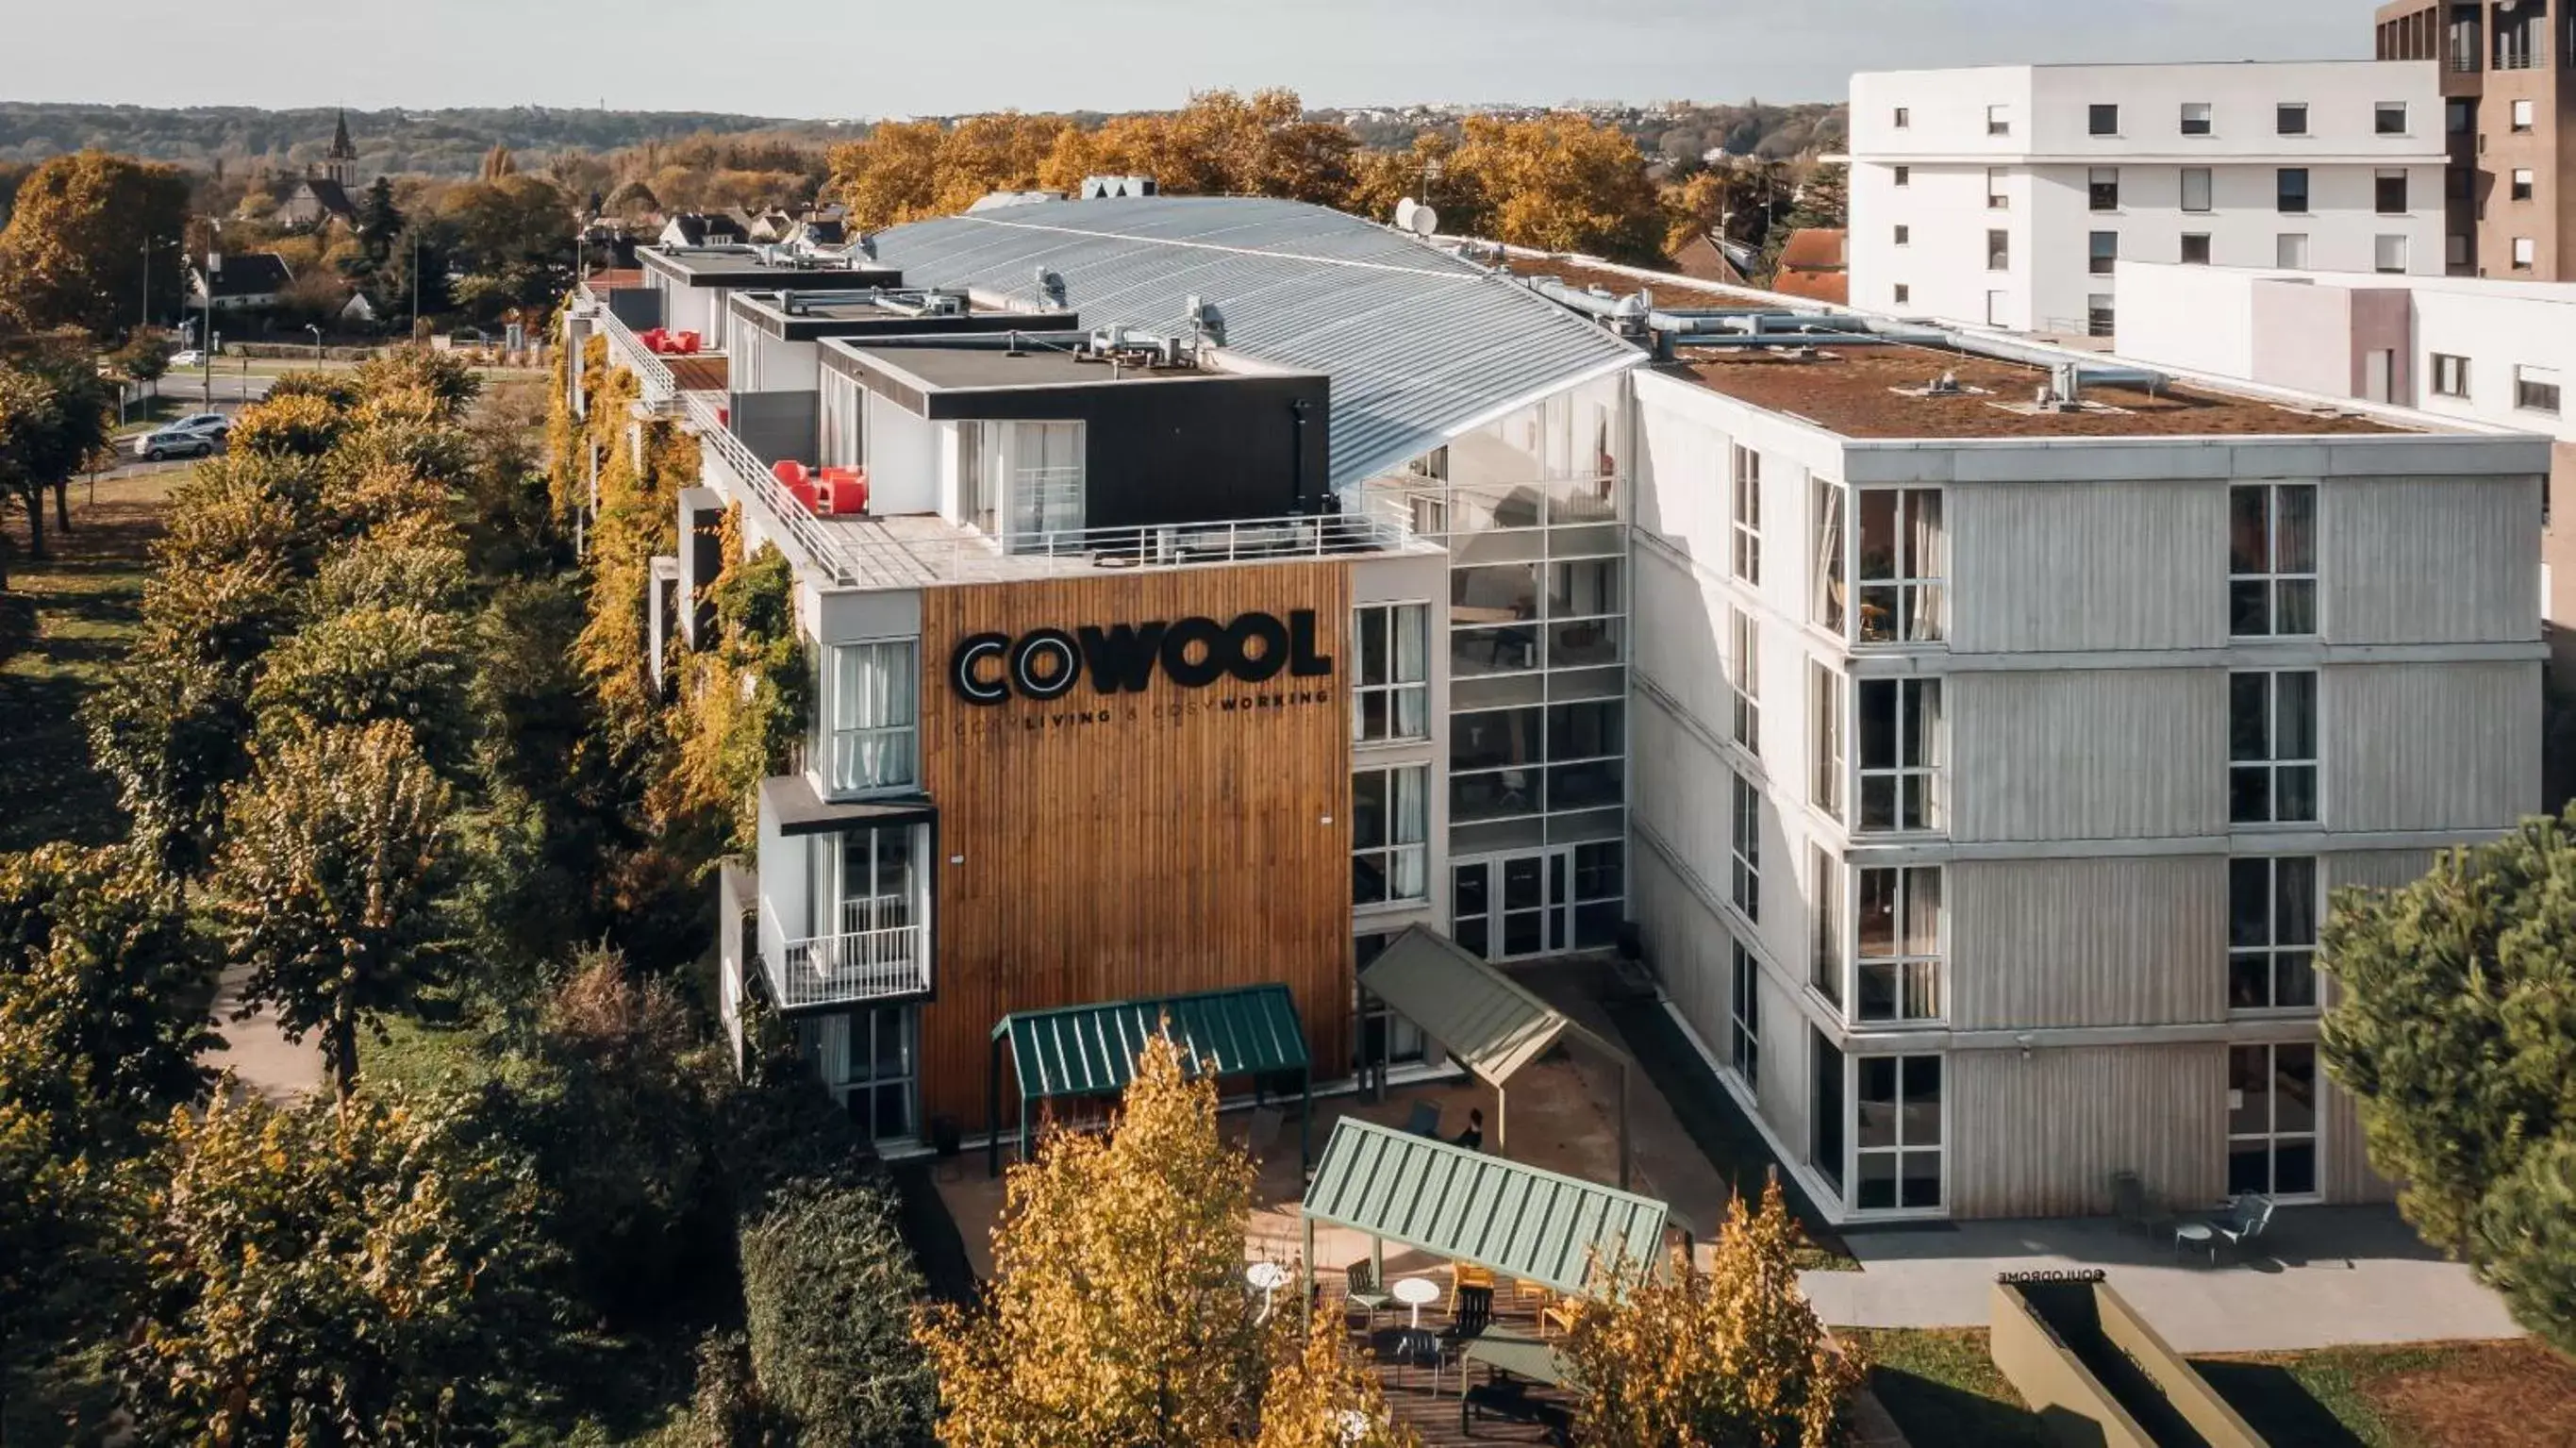 Property building, Bird's-eye View in COWOOL Cergy